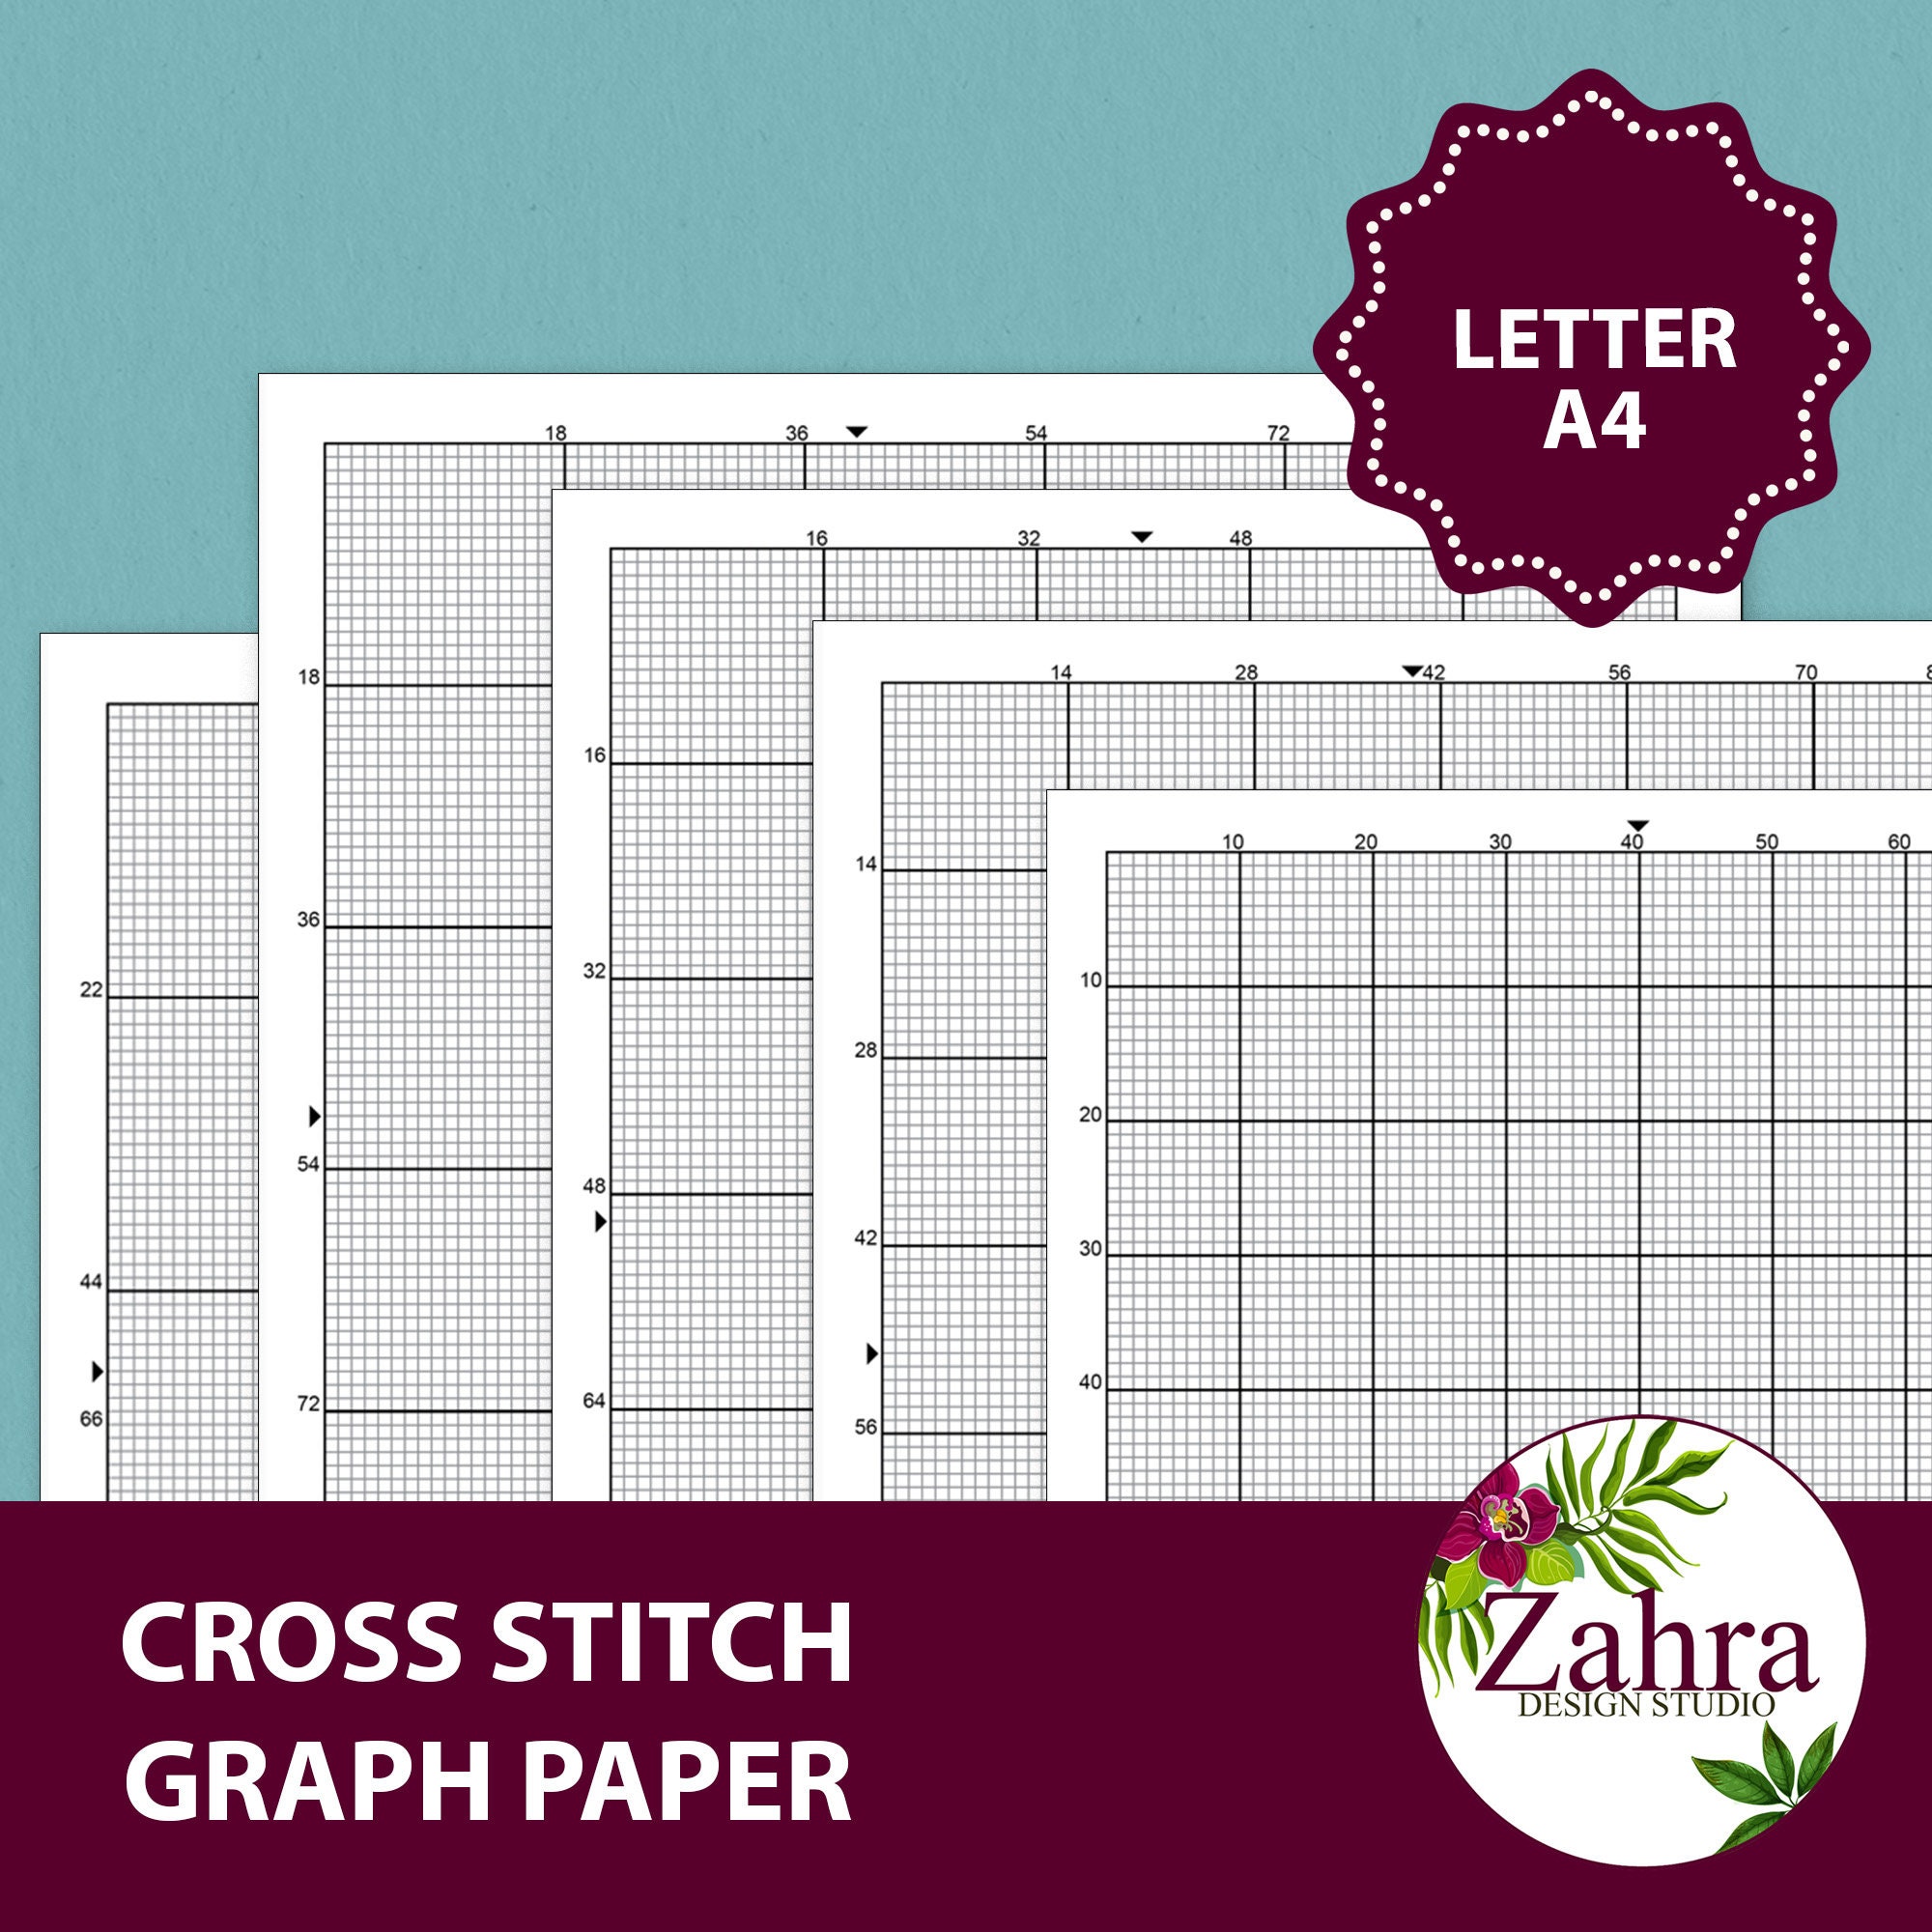 Cross Stitch Kit Design: Graph Paper for Creating Cross Stitch and Embroidery Patterns, Book Size 8.5 X 11 150 Graph Paper Pages [Book]